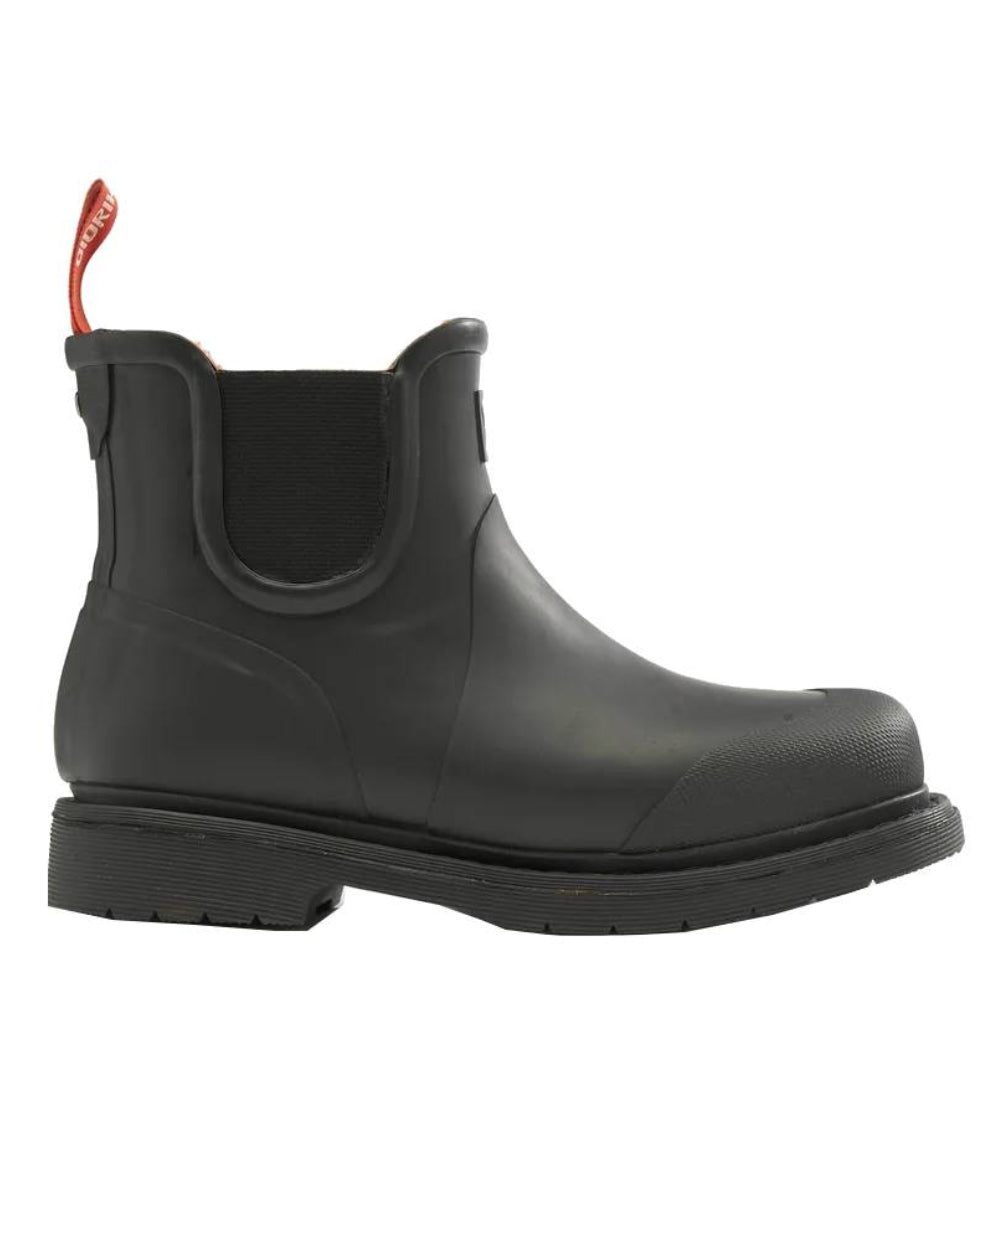 Black Coloured Didriksons Vinga Womens Rubber Boots On A White Background 